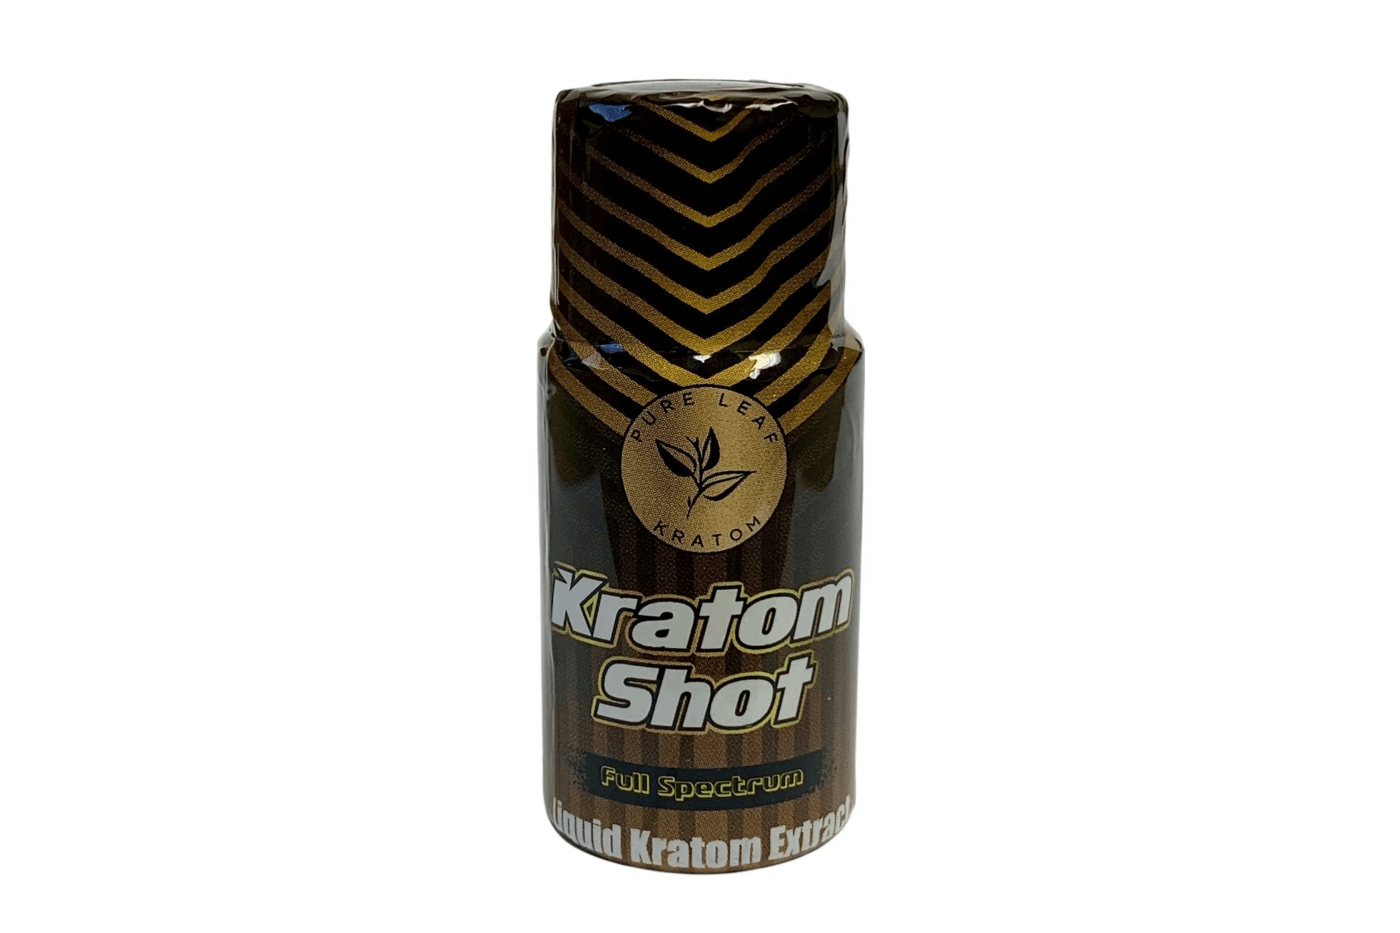 What are Kratom Shots?